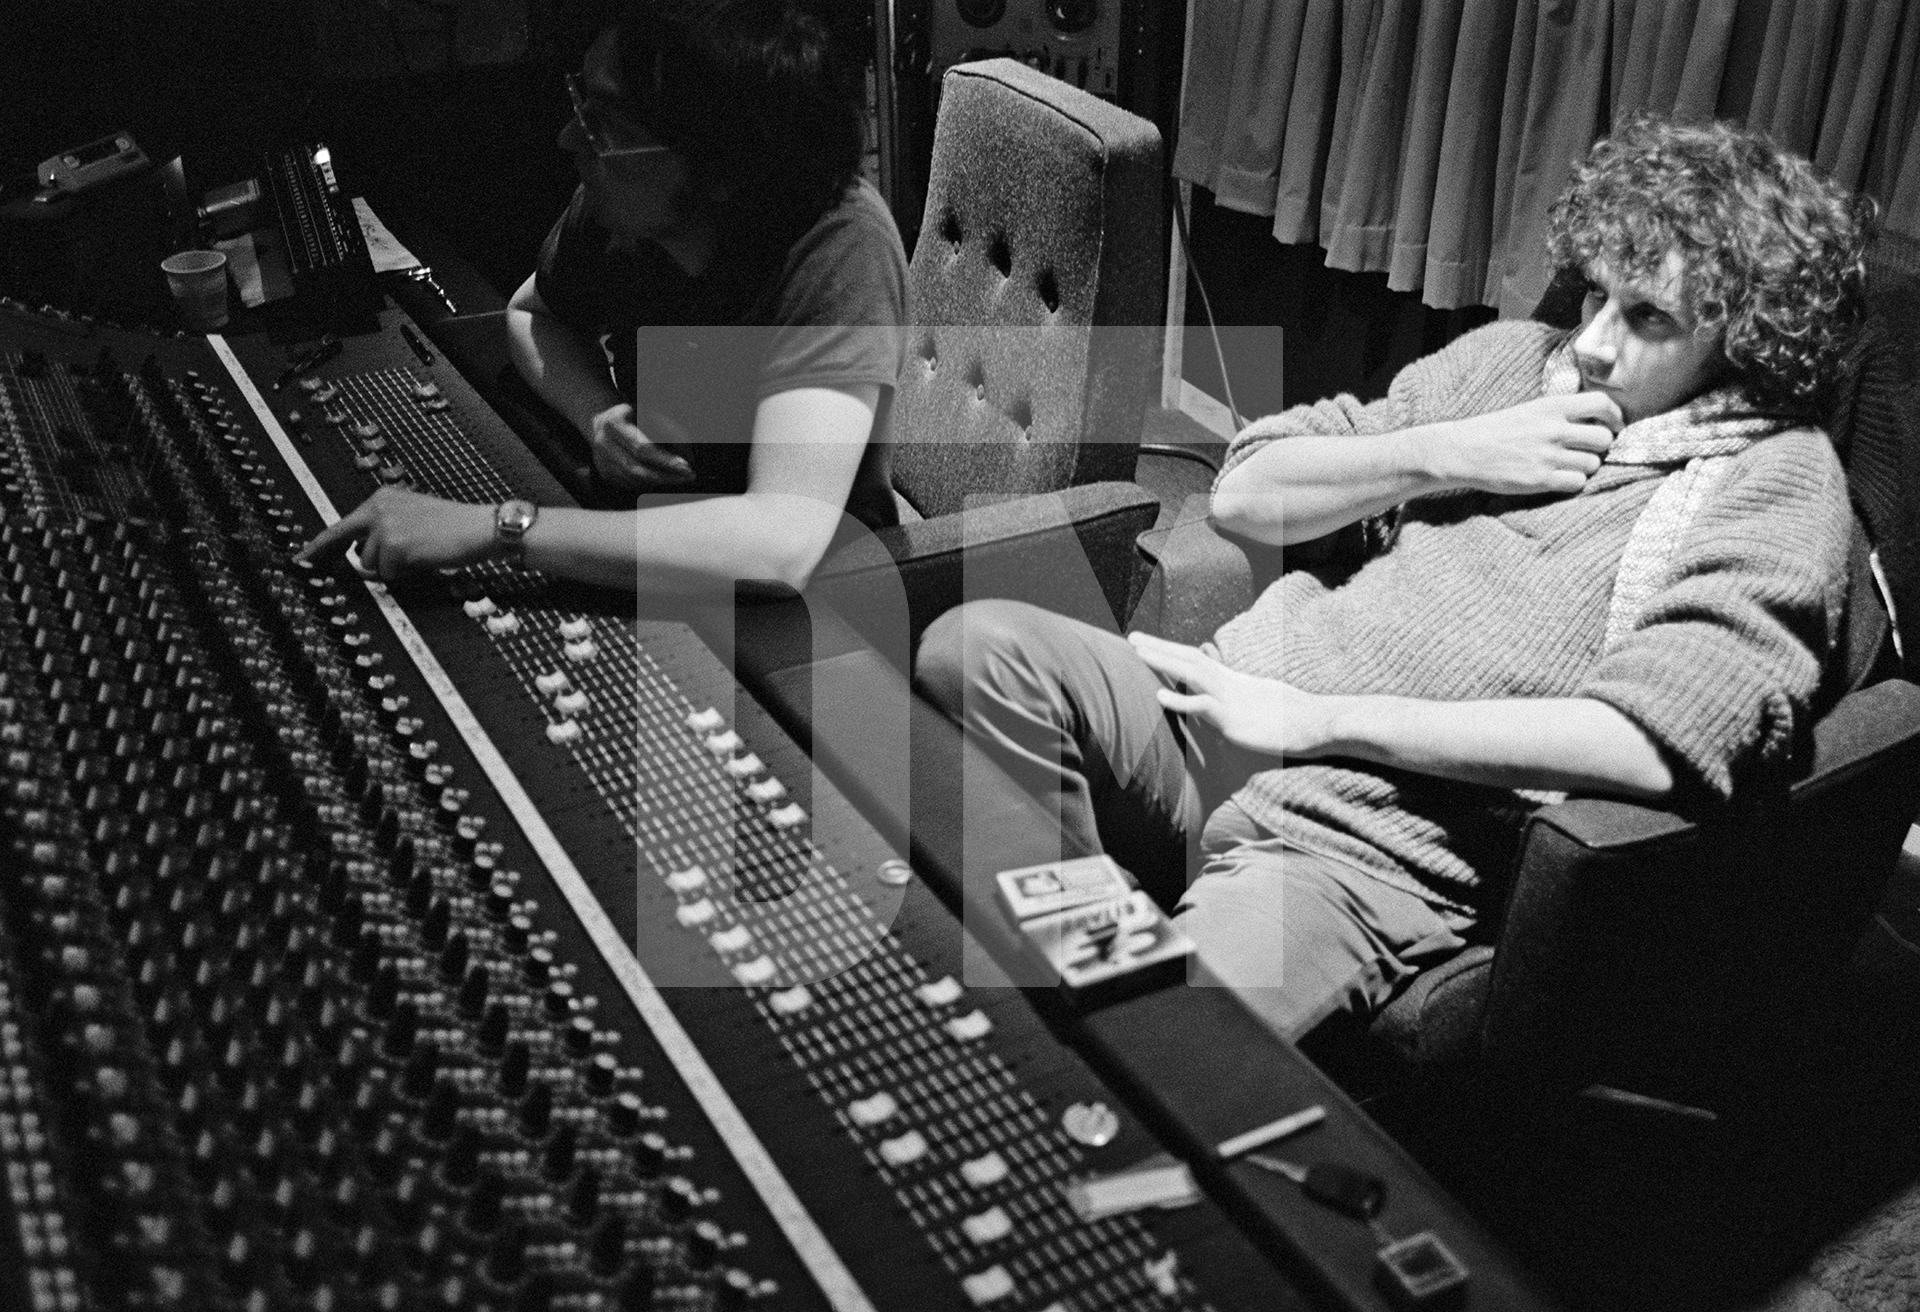 Martin Hannett, Factory producer of Joy Division records, at Pennine Sound Studio, Oldham. January 1980 by Daniel Meadows